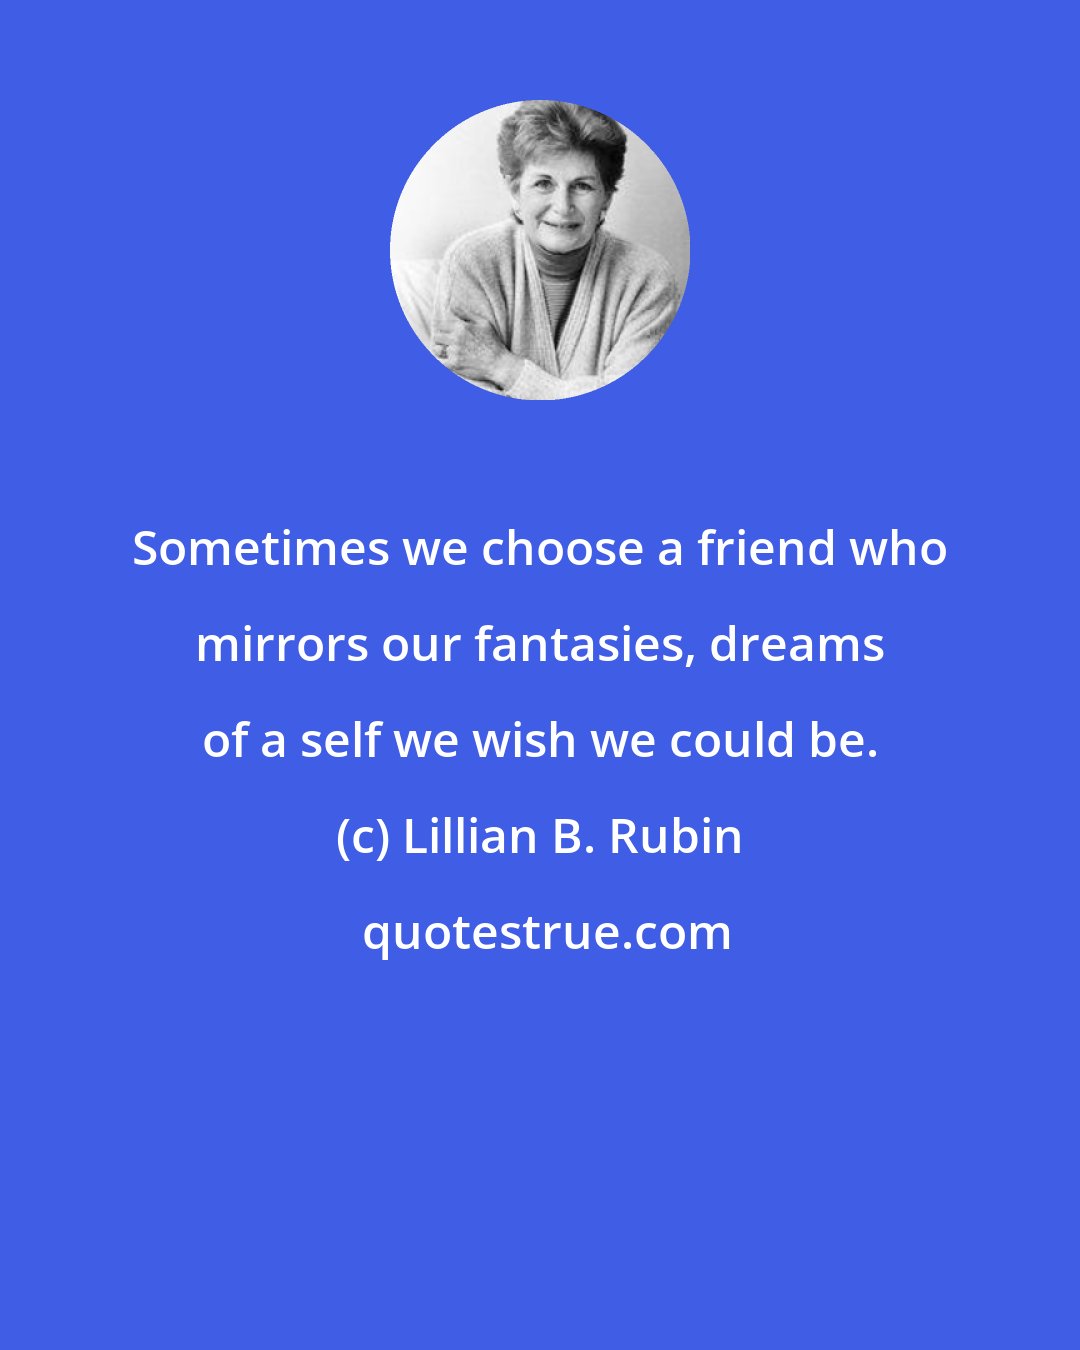 Lillian B. Rubin: Sometimes we choose a friend who mirrors our fantasies, dreams of a self we wish we could be.